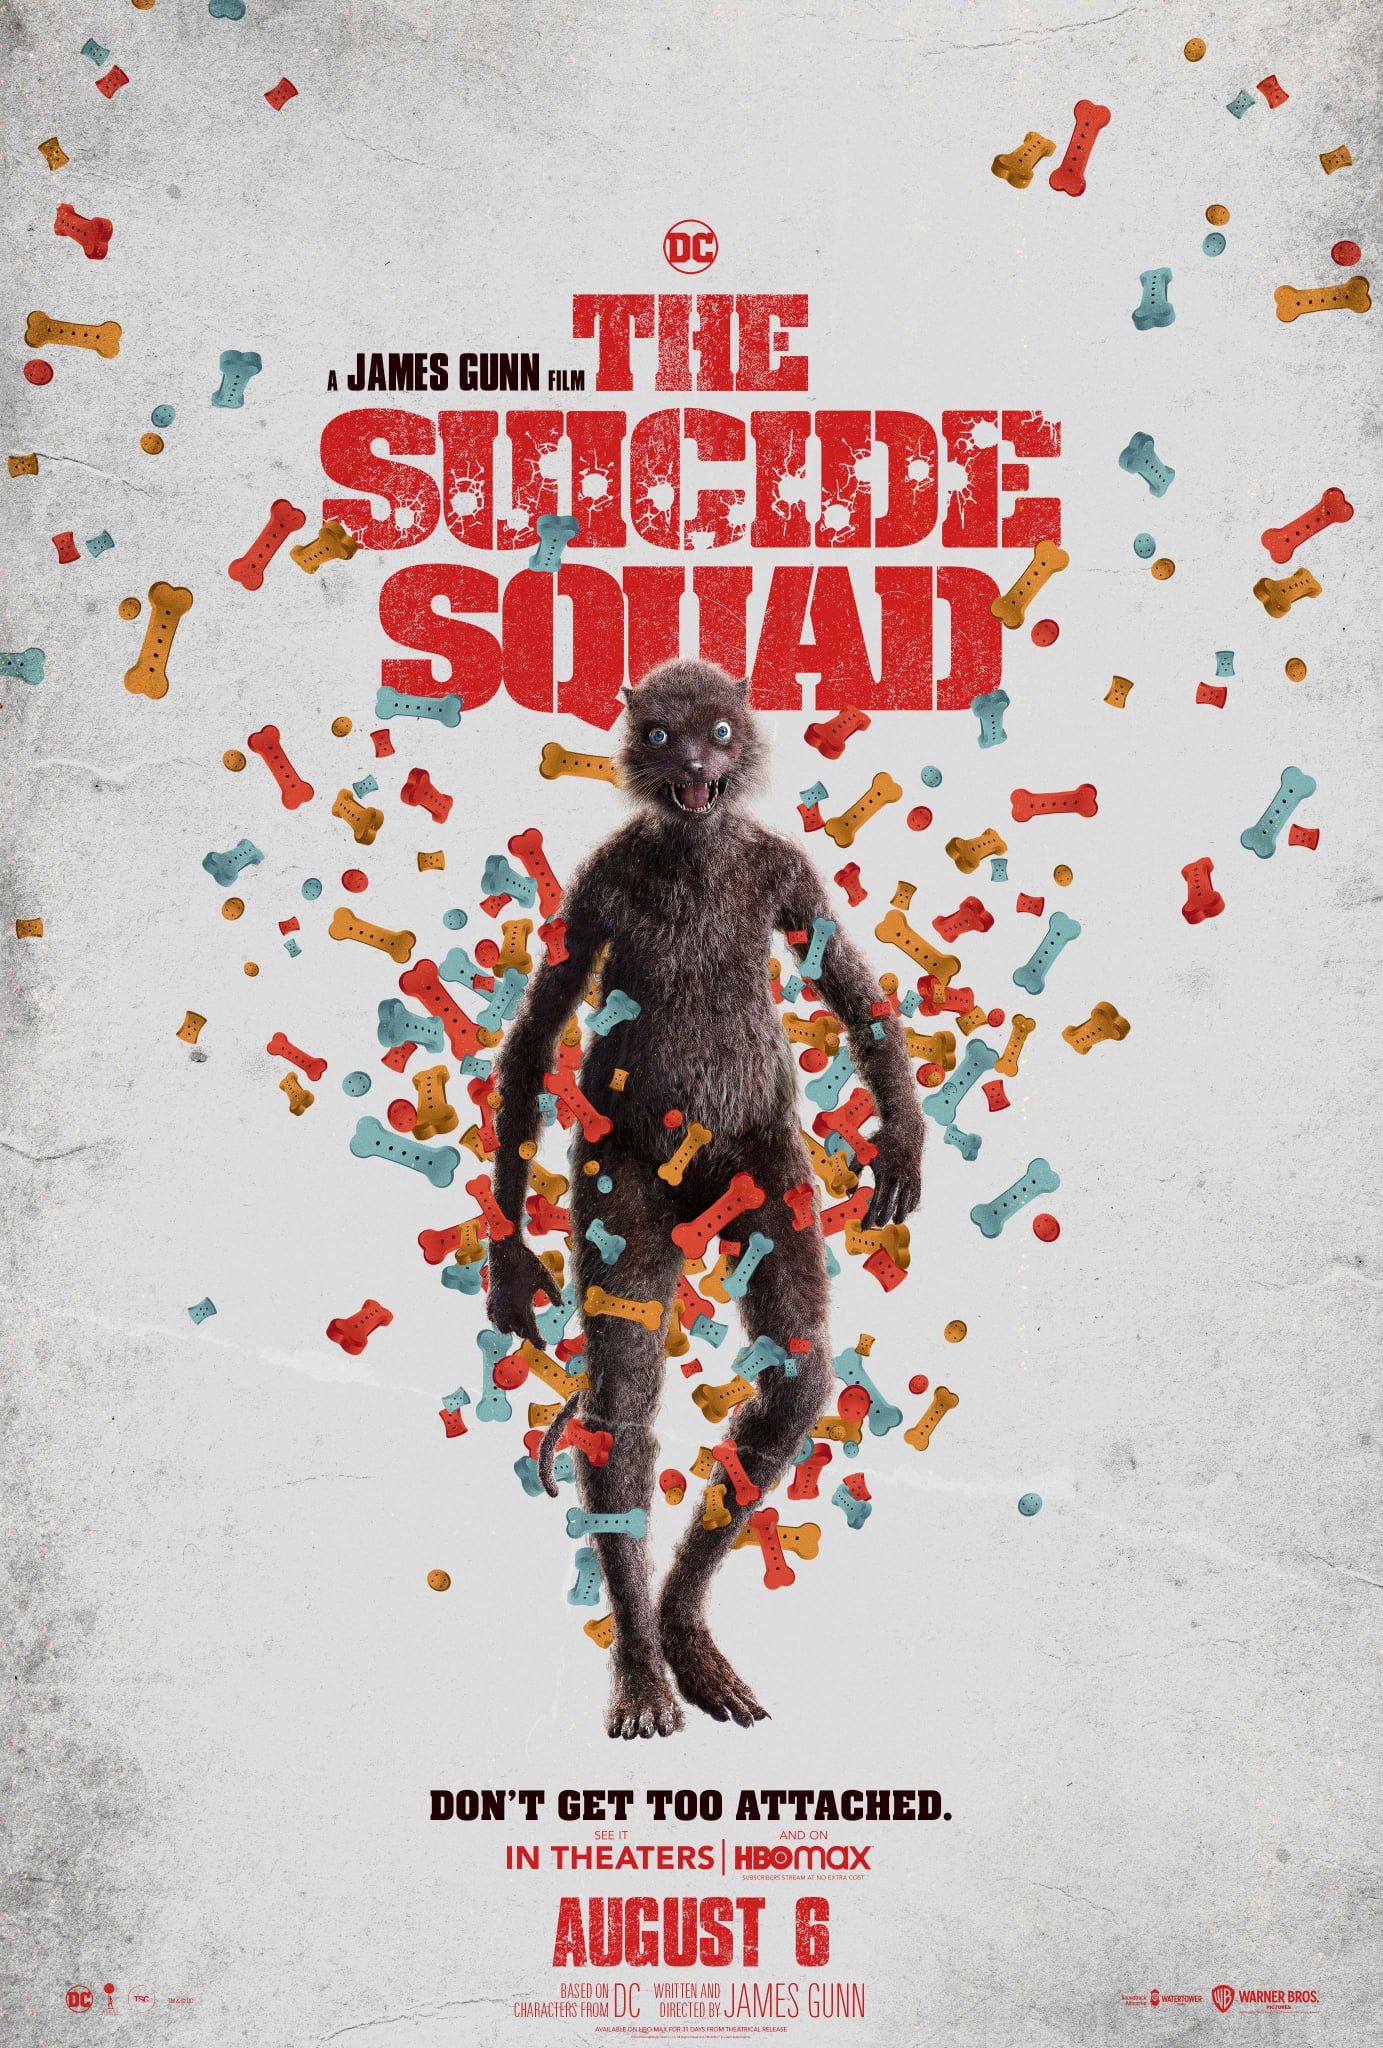 The Suicide Squad character poster